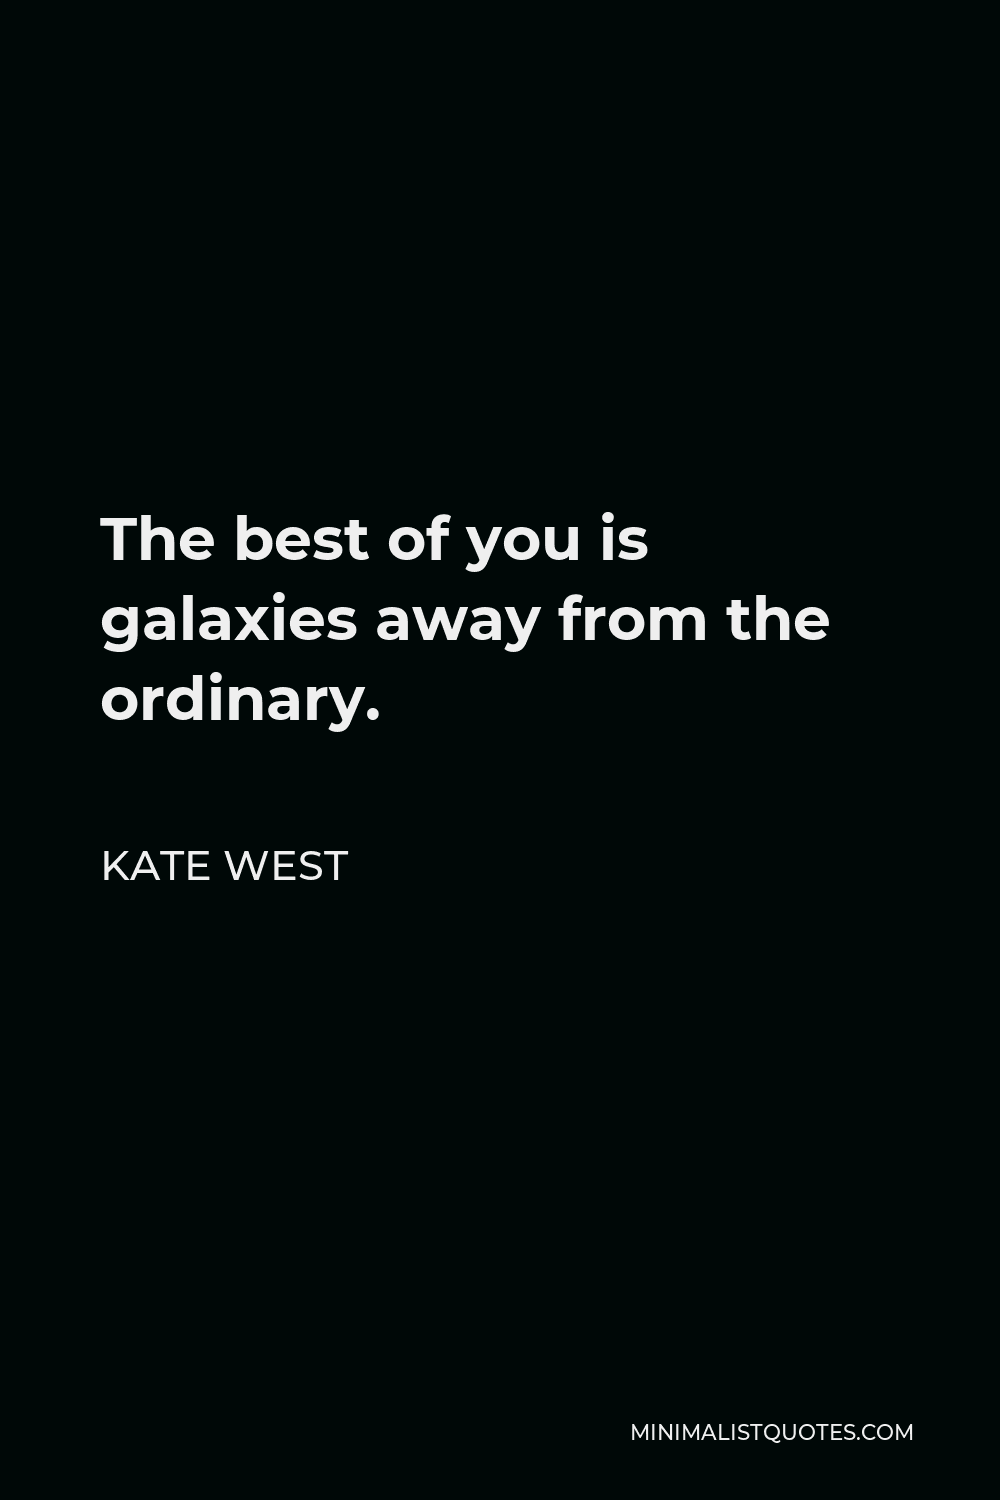 Kate West Quote - The best of you is galaxies away from the ordinary.